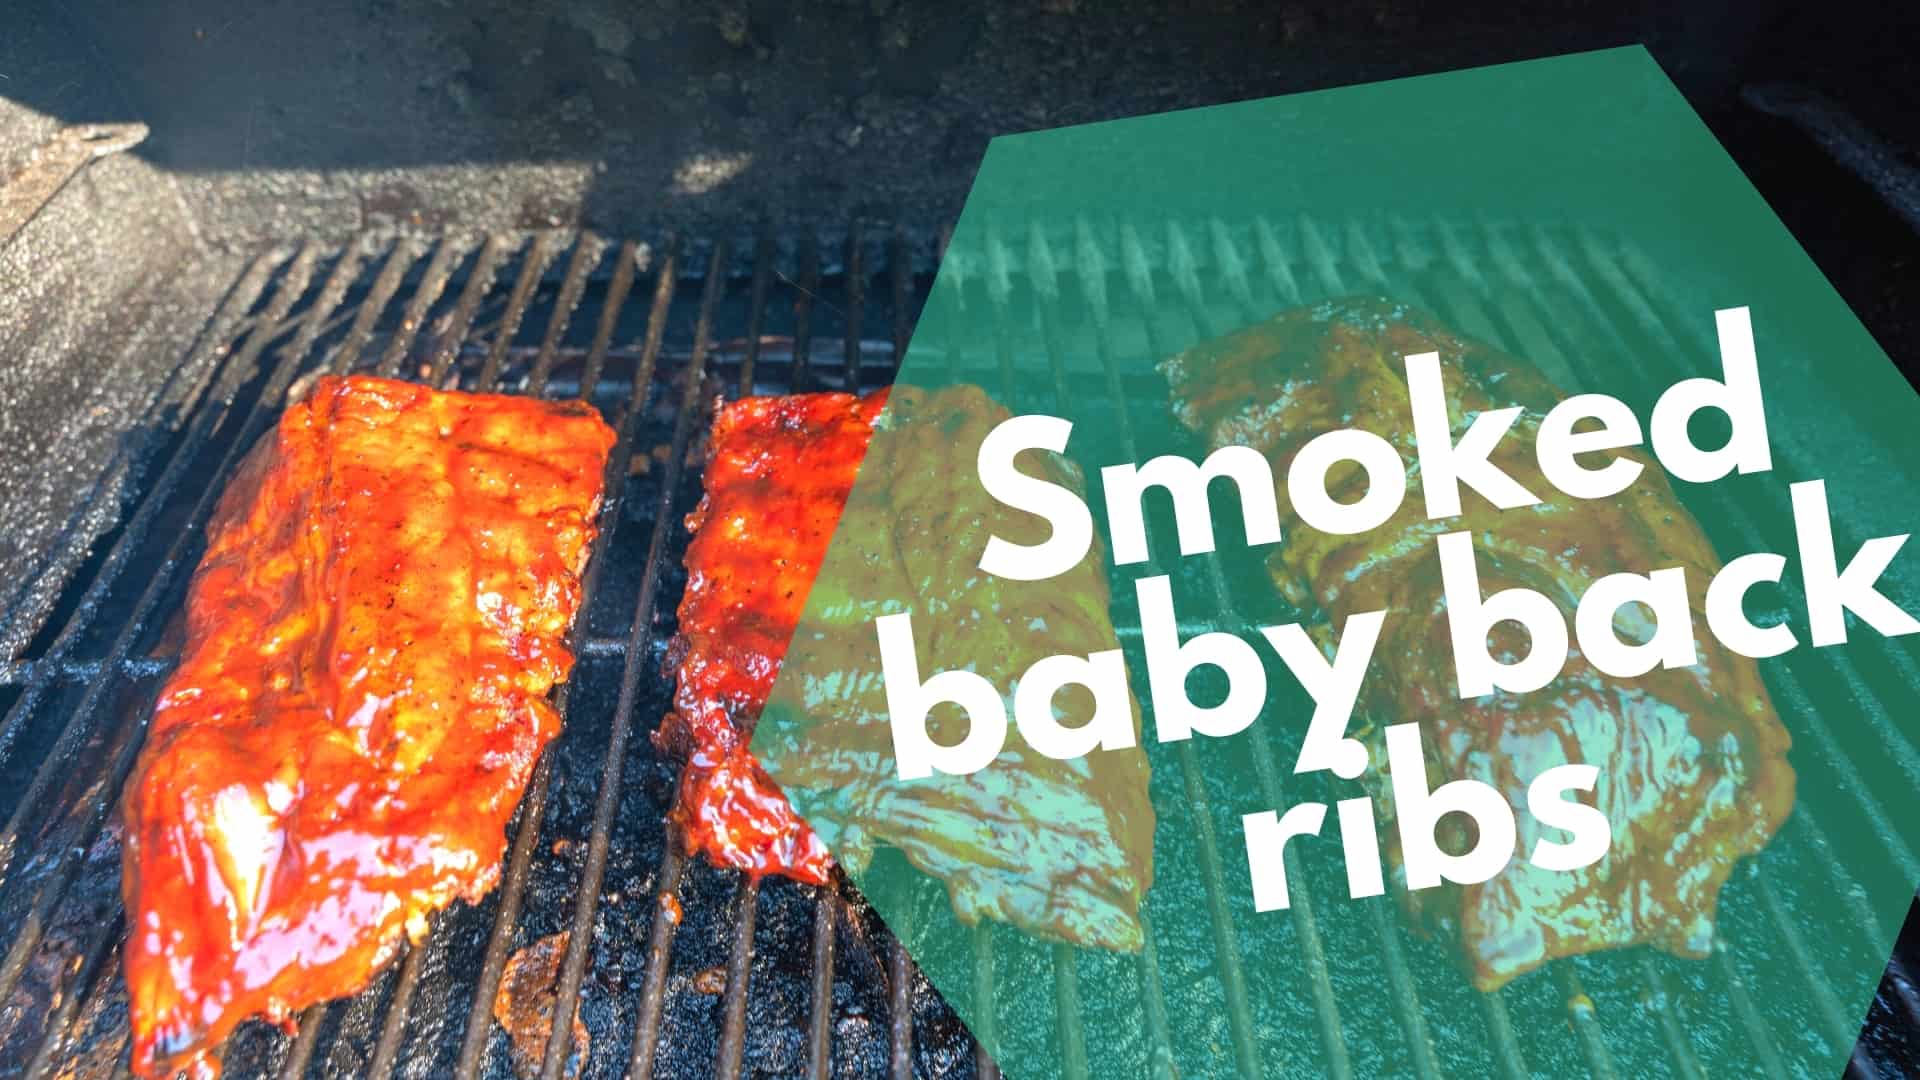 Pellet smoker baby back ribs: The unknown tip for delicious ribs